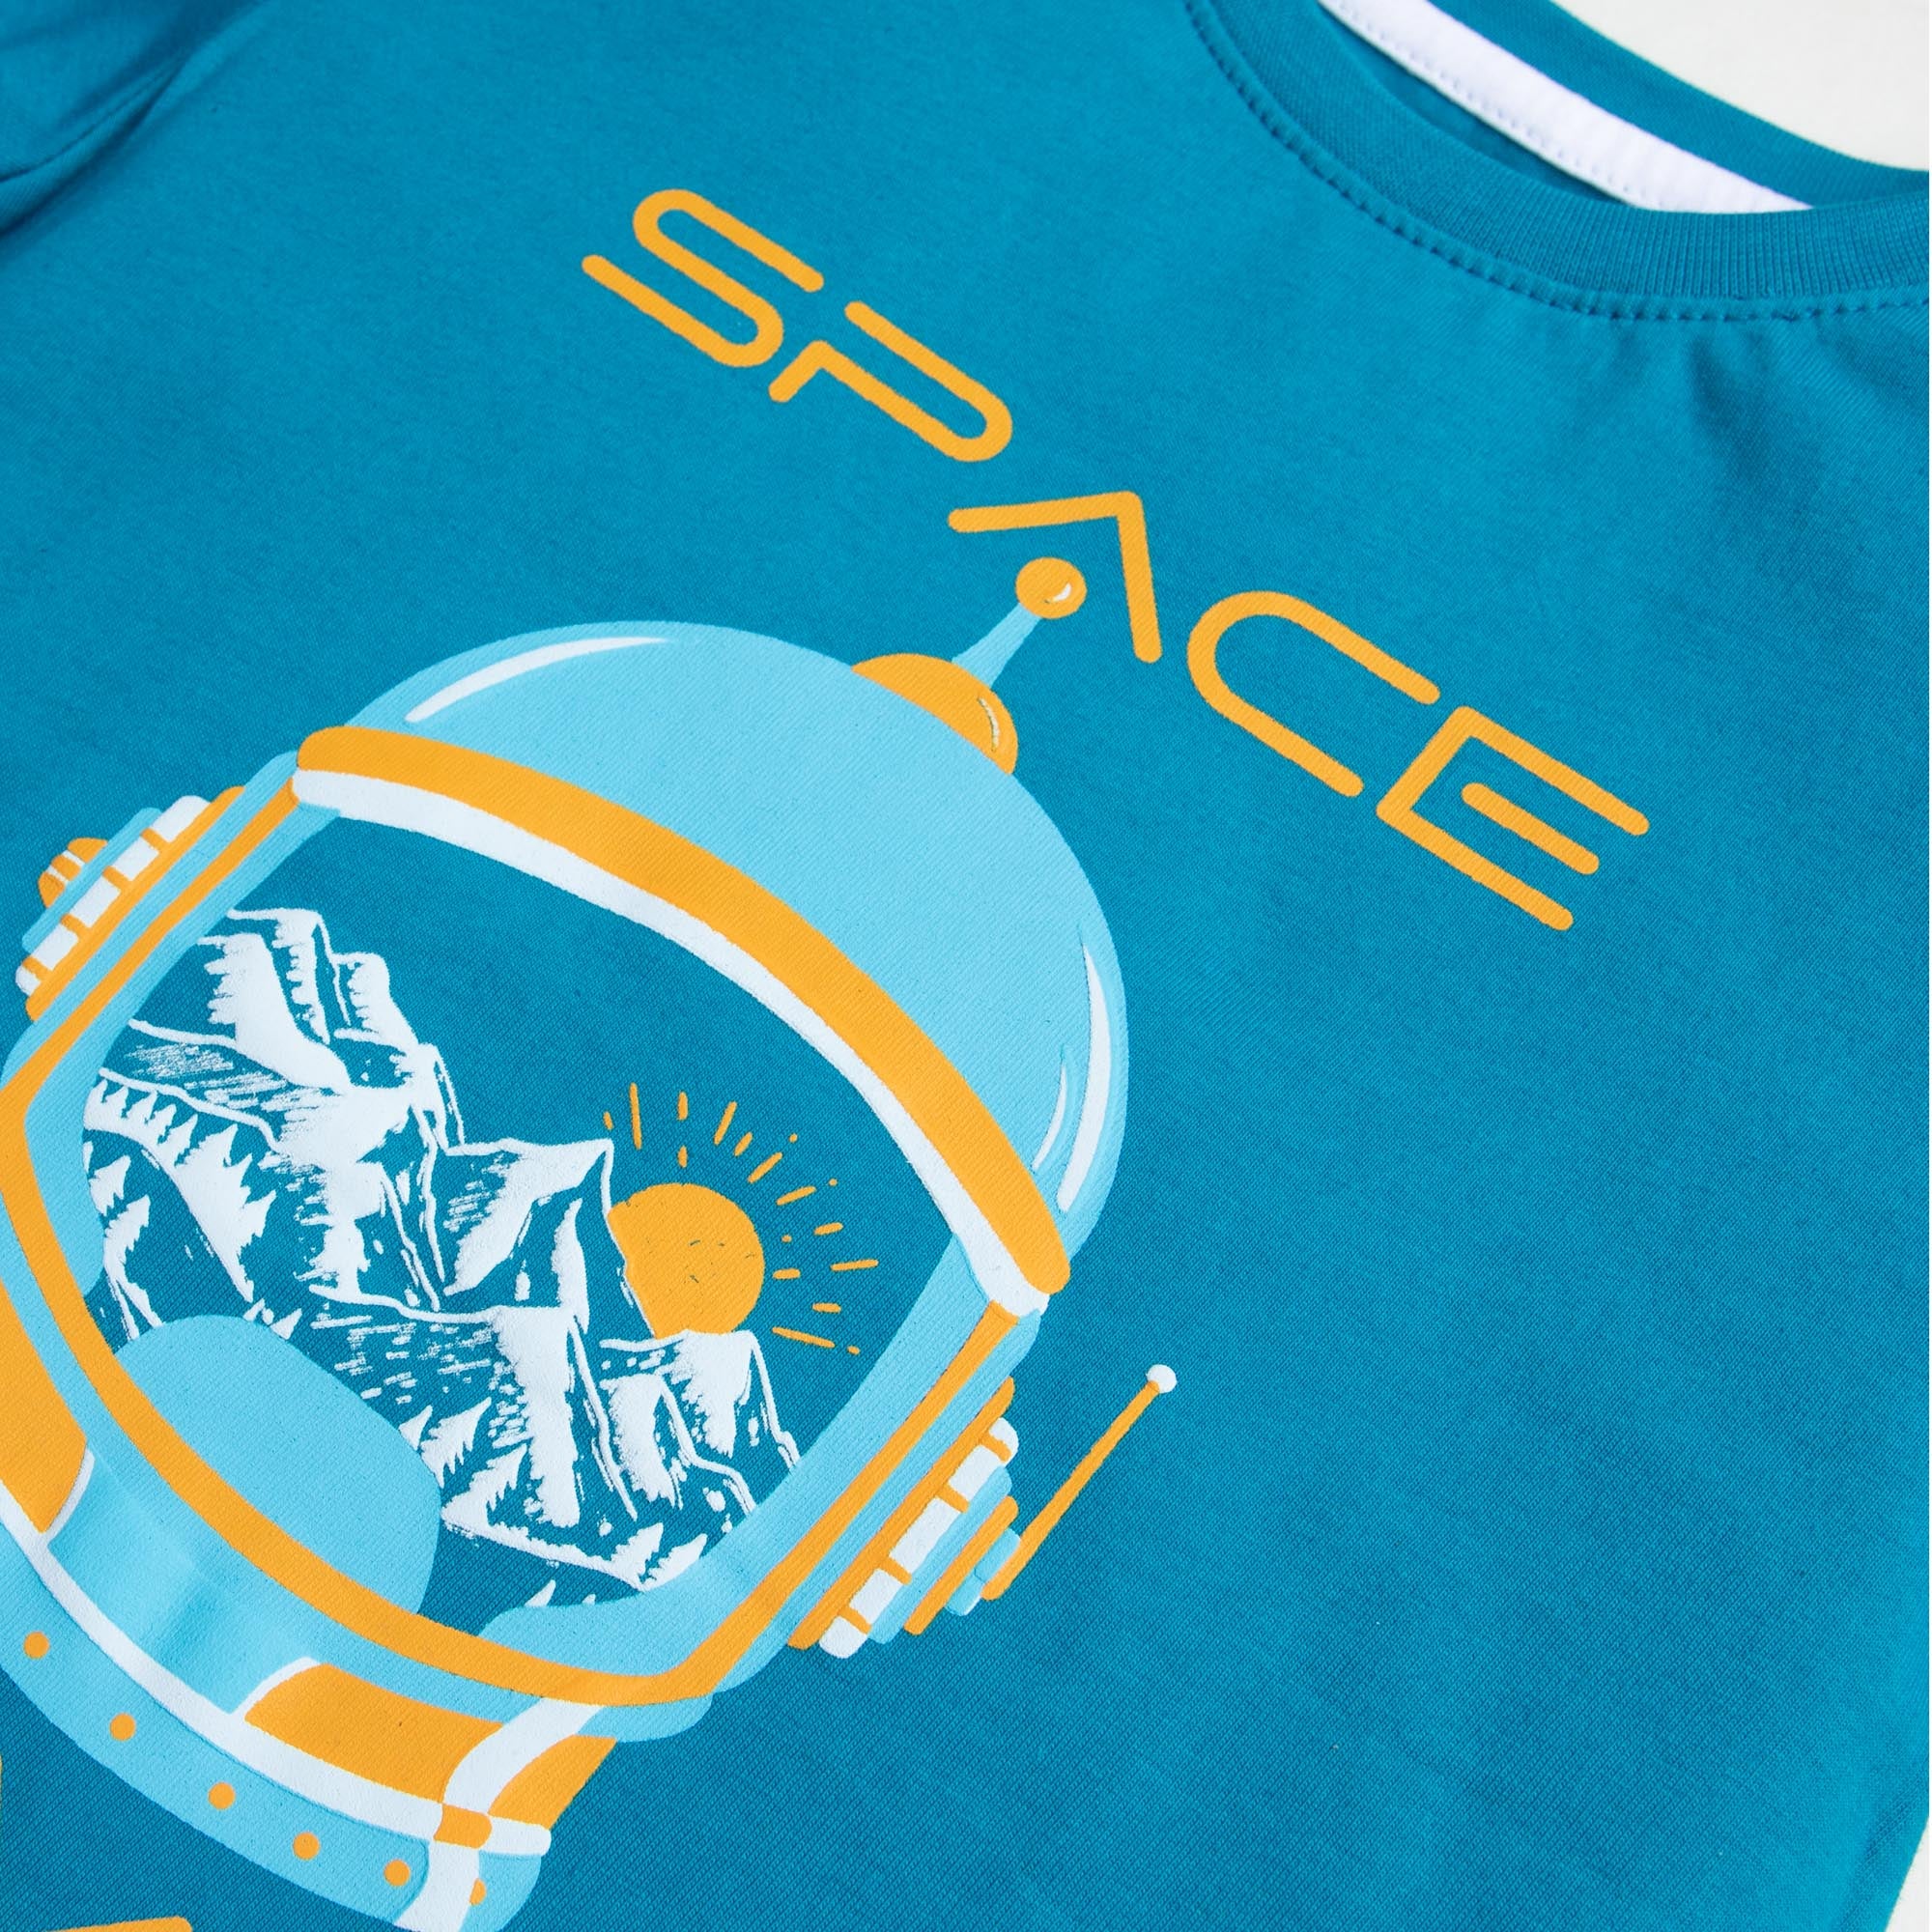 Space Travel T-shirt